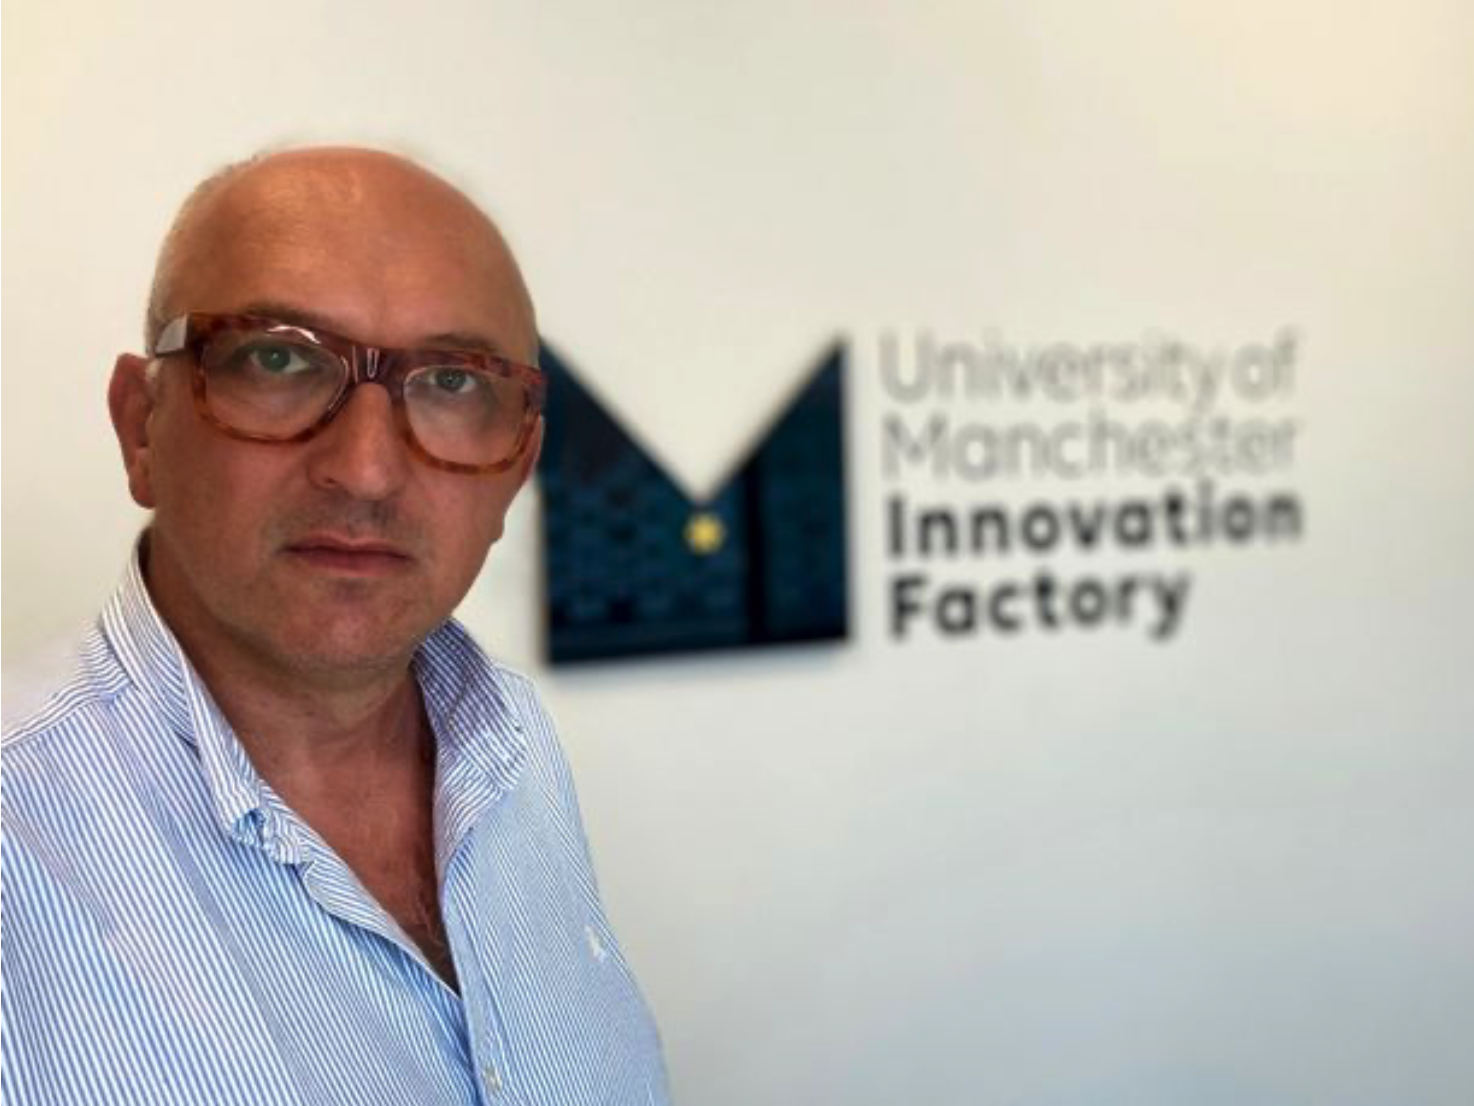 Andrew Wilkinson, withUoM Innovation Factory logo behind him